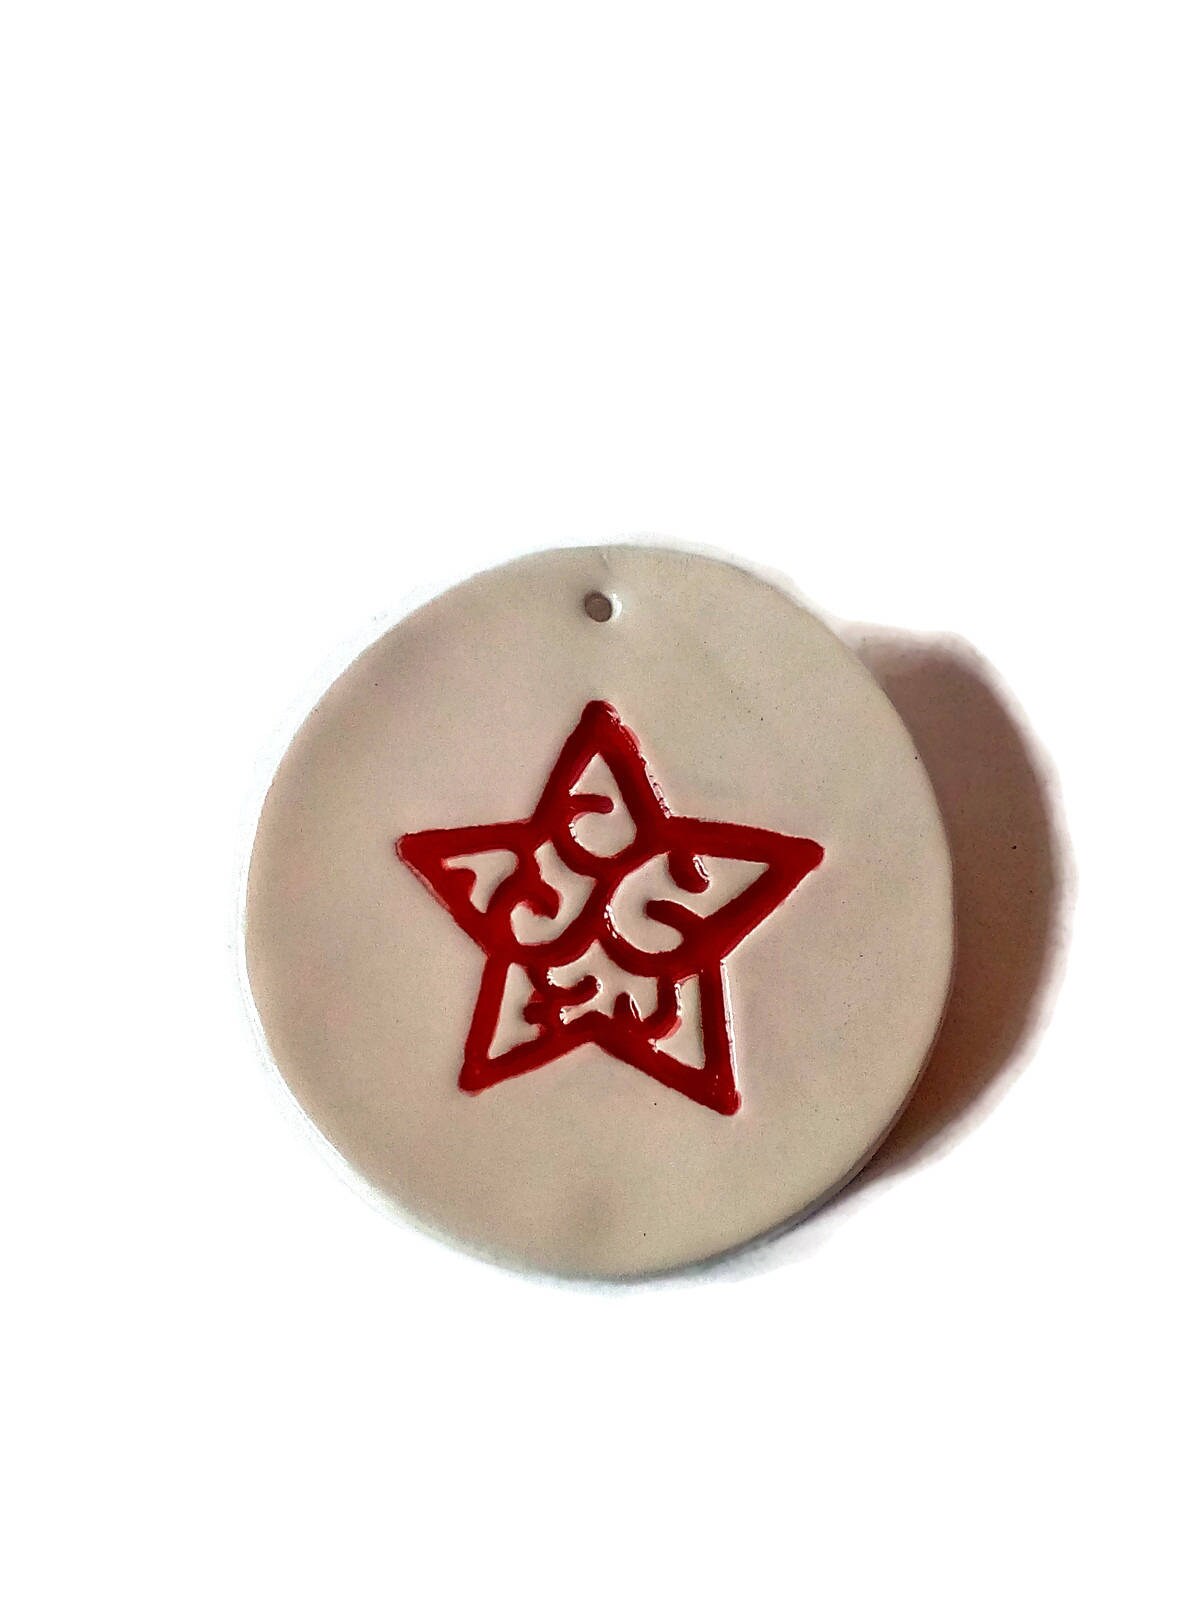 1Pc Red and White Handmade Ceramic Decorative Wall Hanging For Holiday Home Decor, Round Christmas Tree Ornament With Engraved Star - Ceramica Ana Rafael